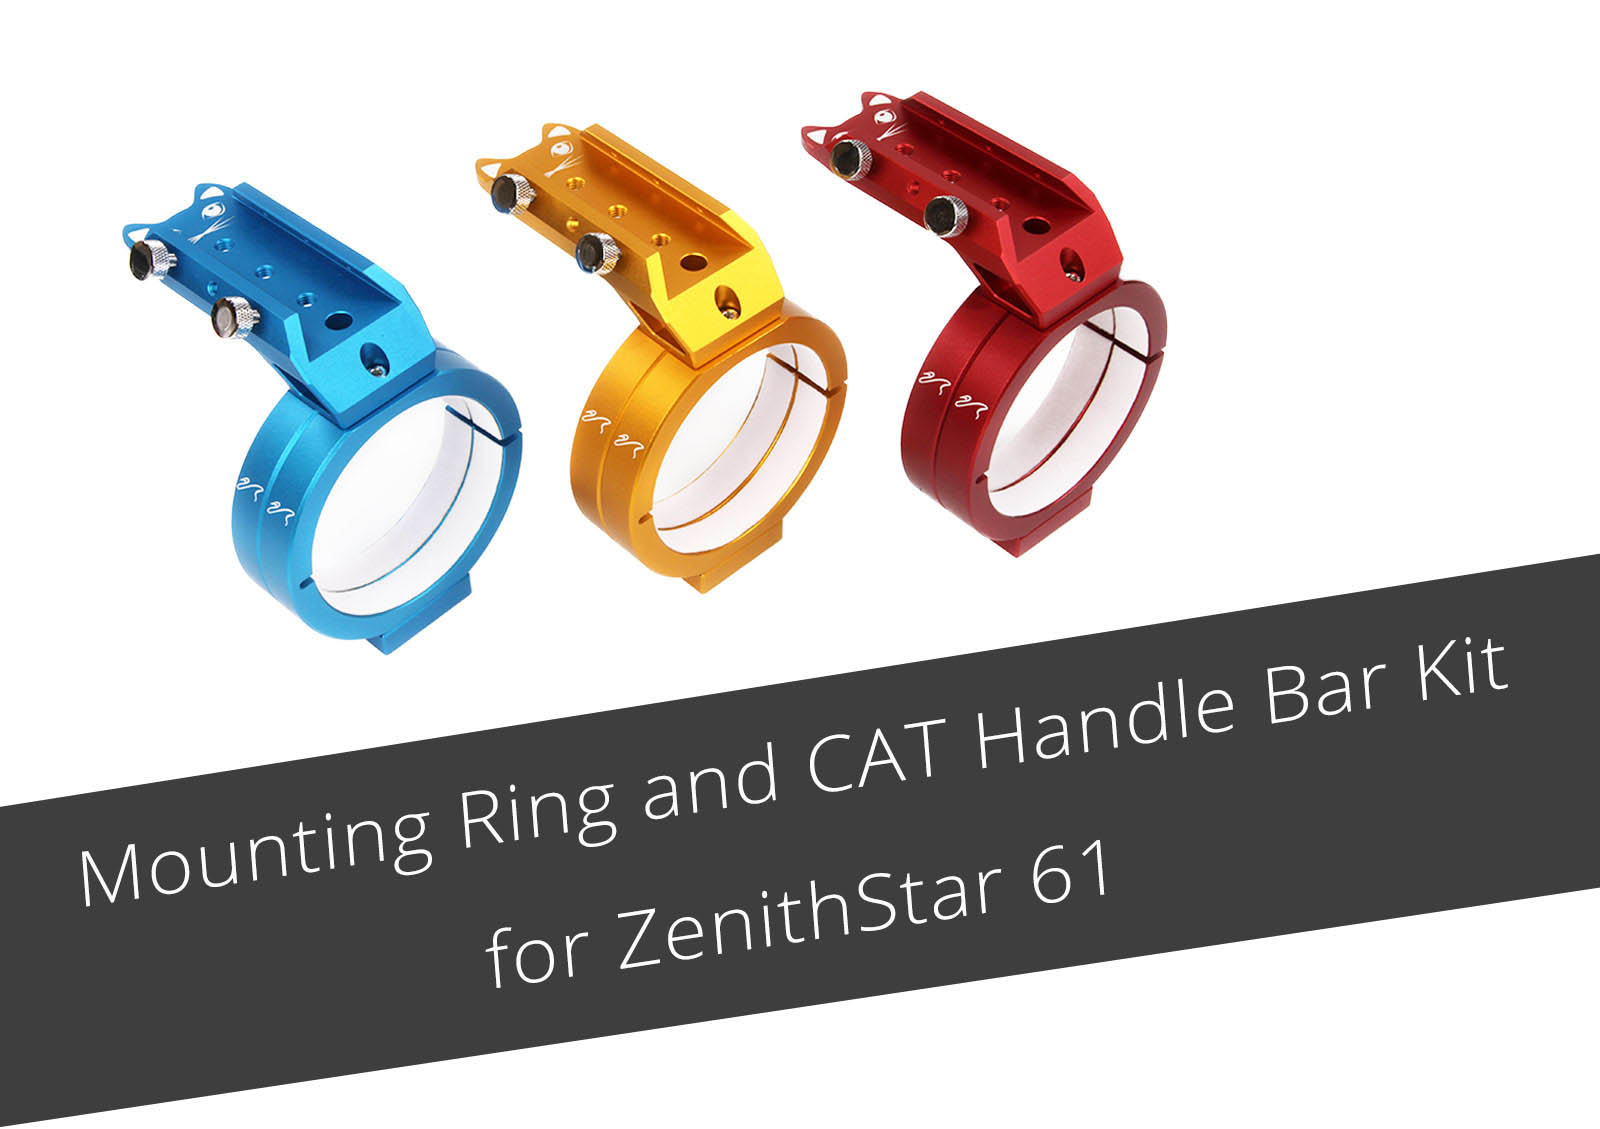 William Optics Mounting Ring and CAT Handle Bar Kit for ZenithStar 61 version I